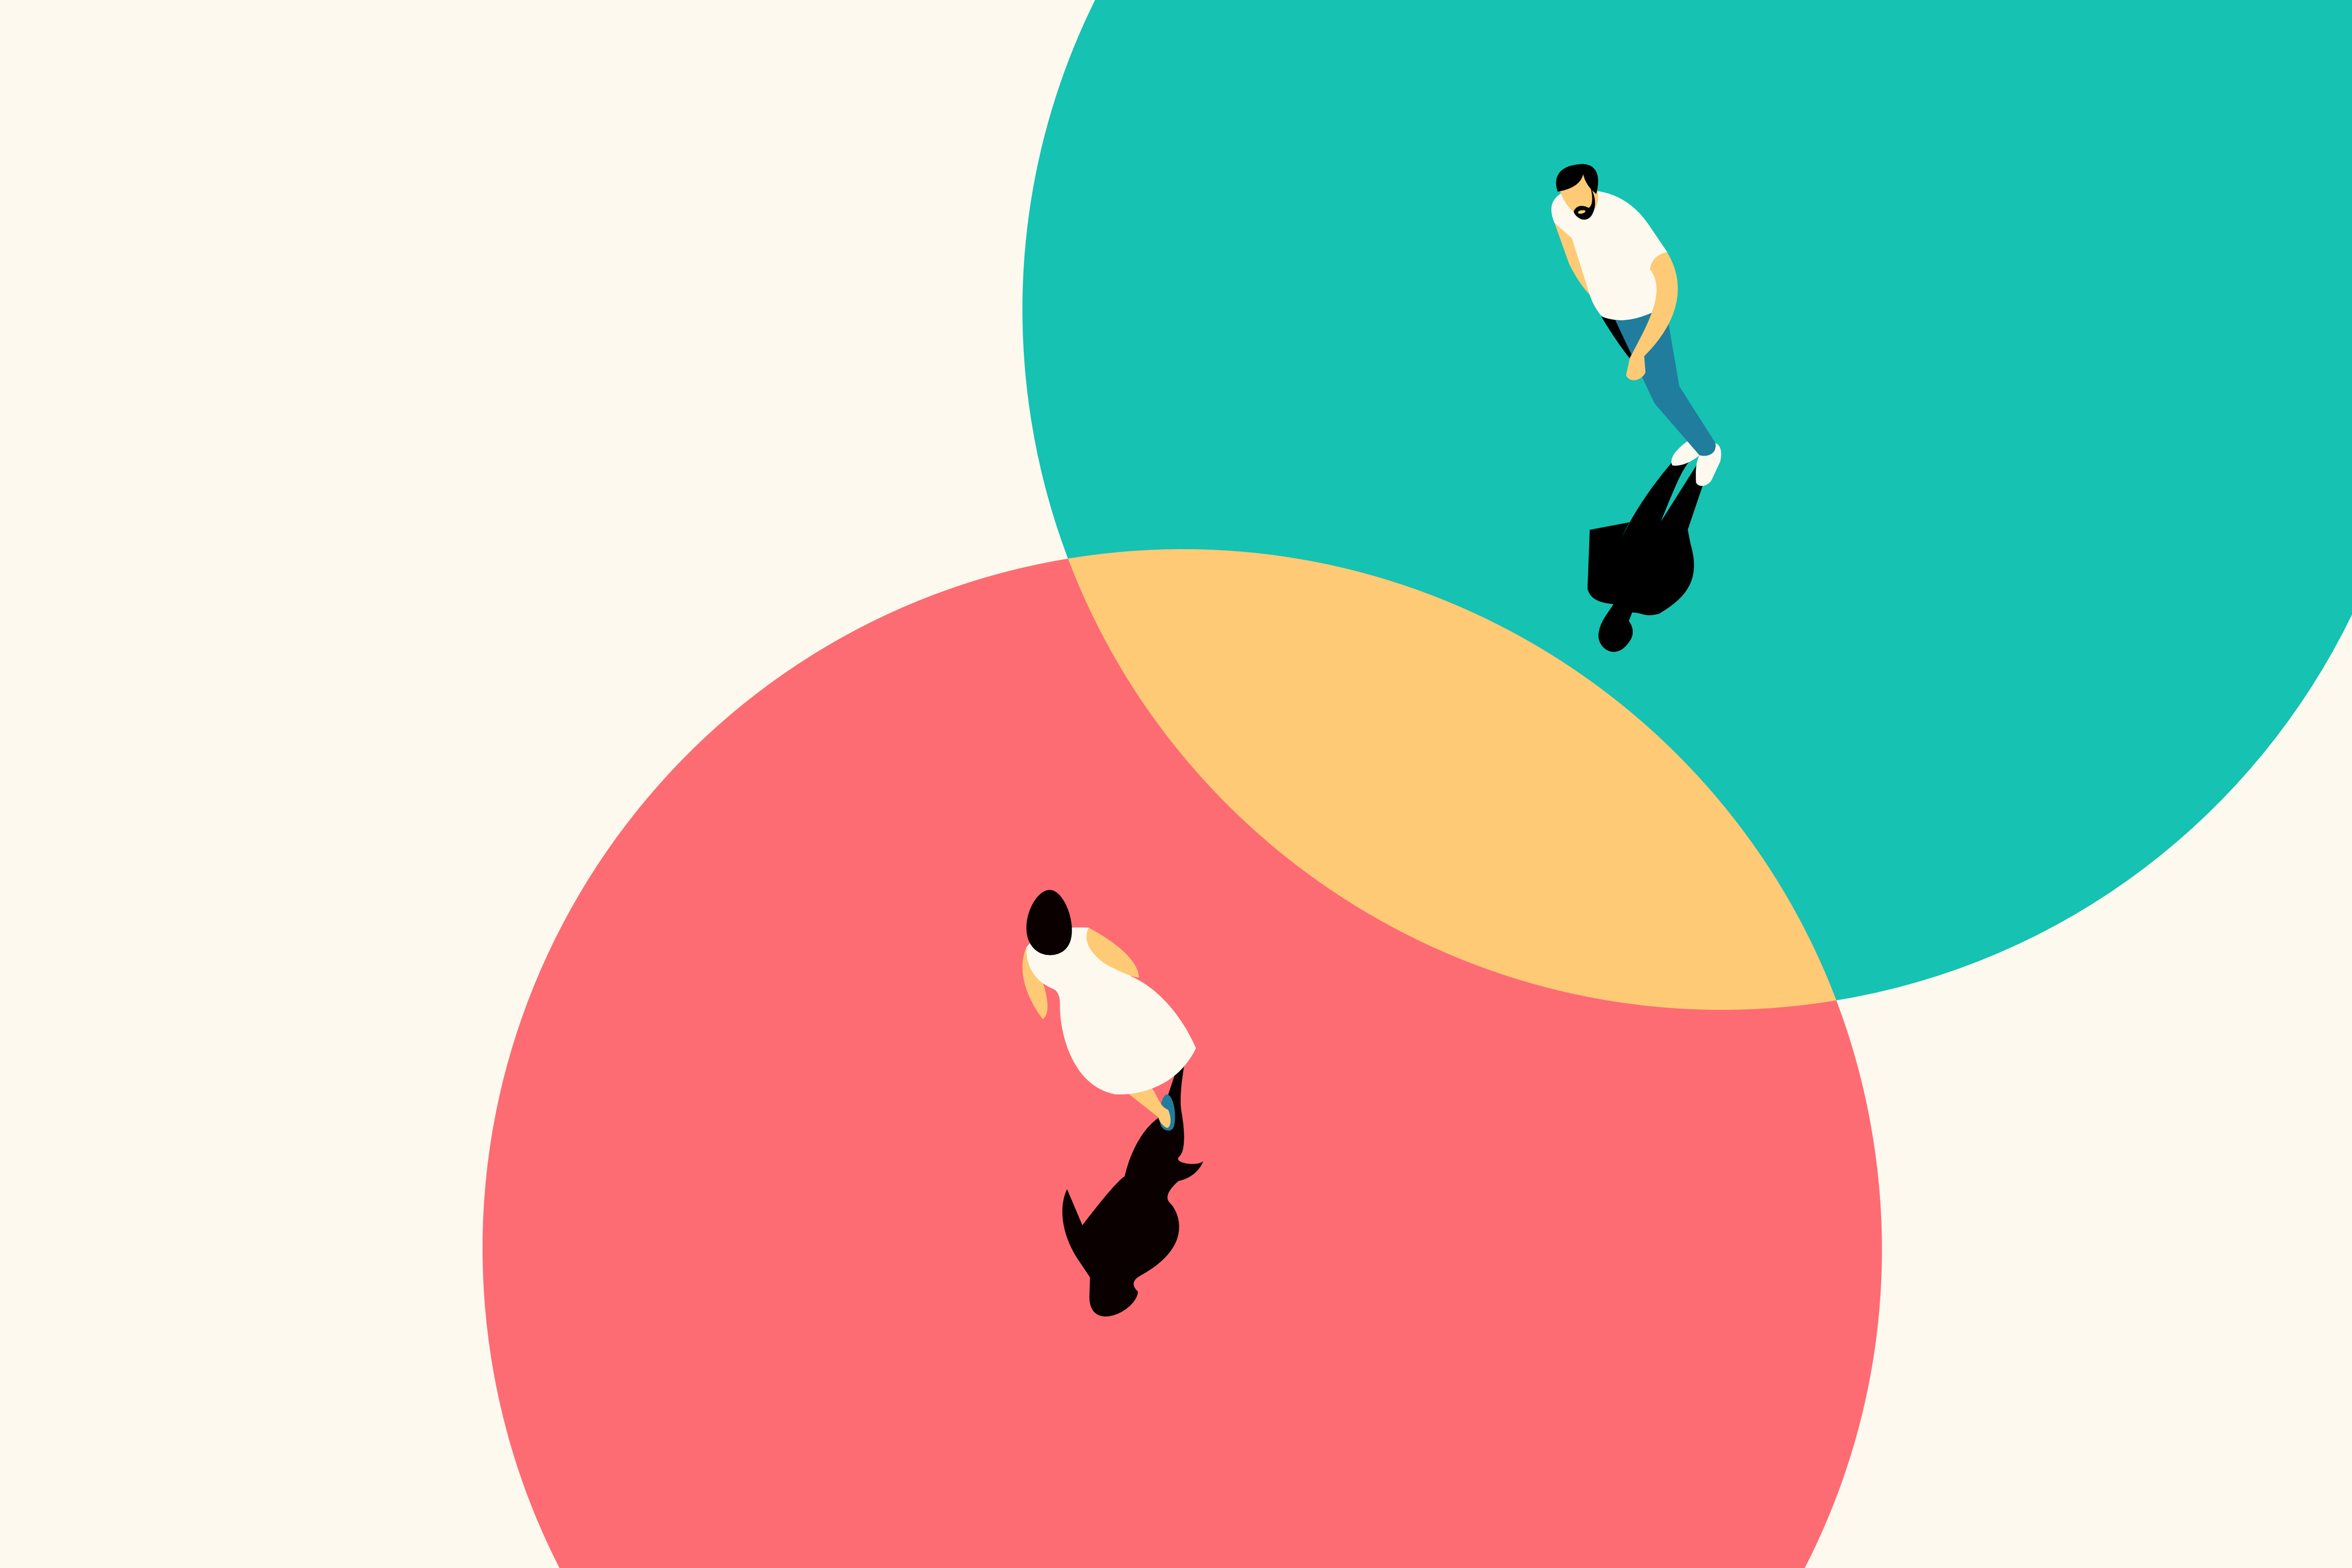 Two illustrated figures walking on overlapping circular shapes